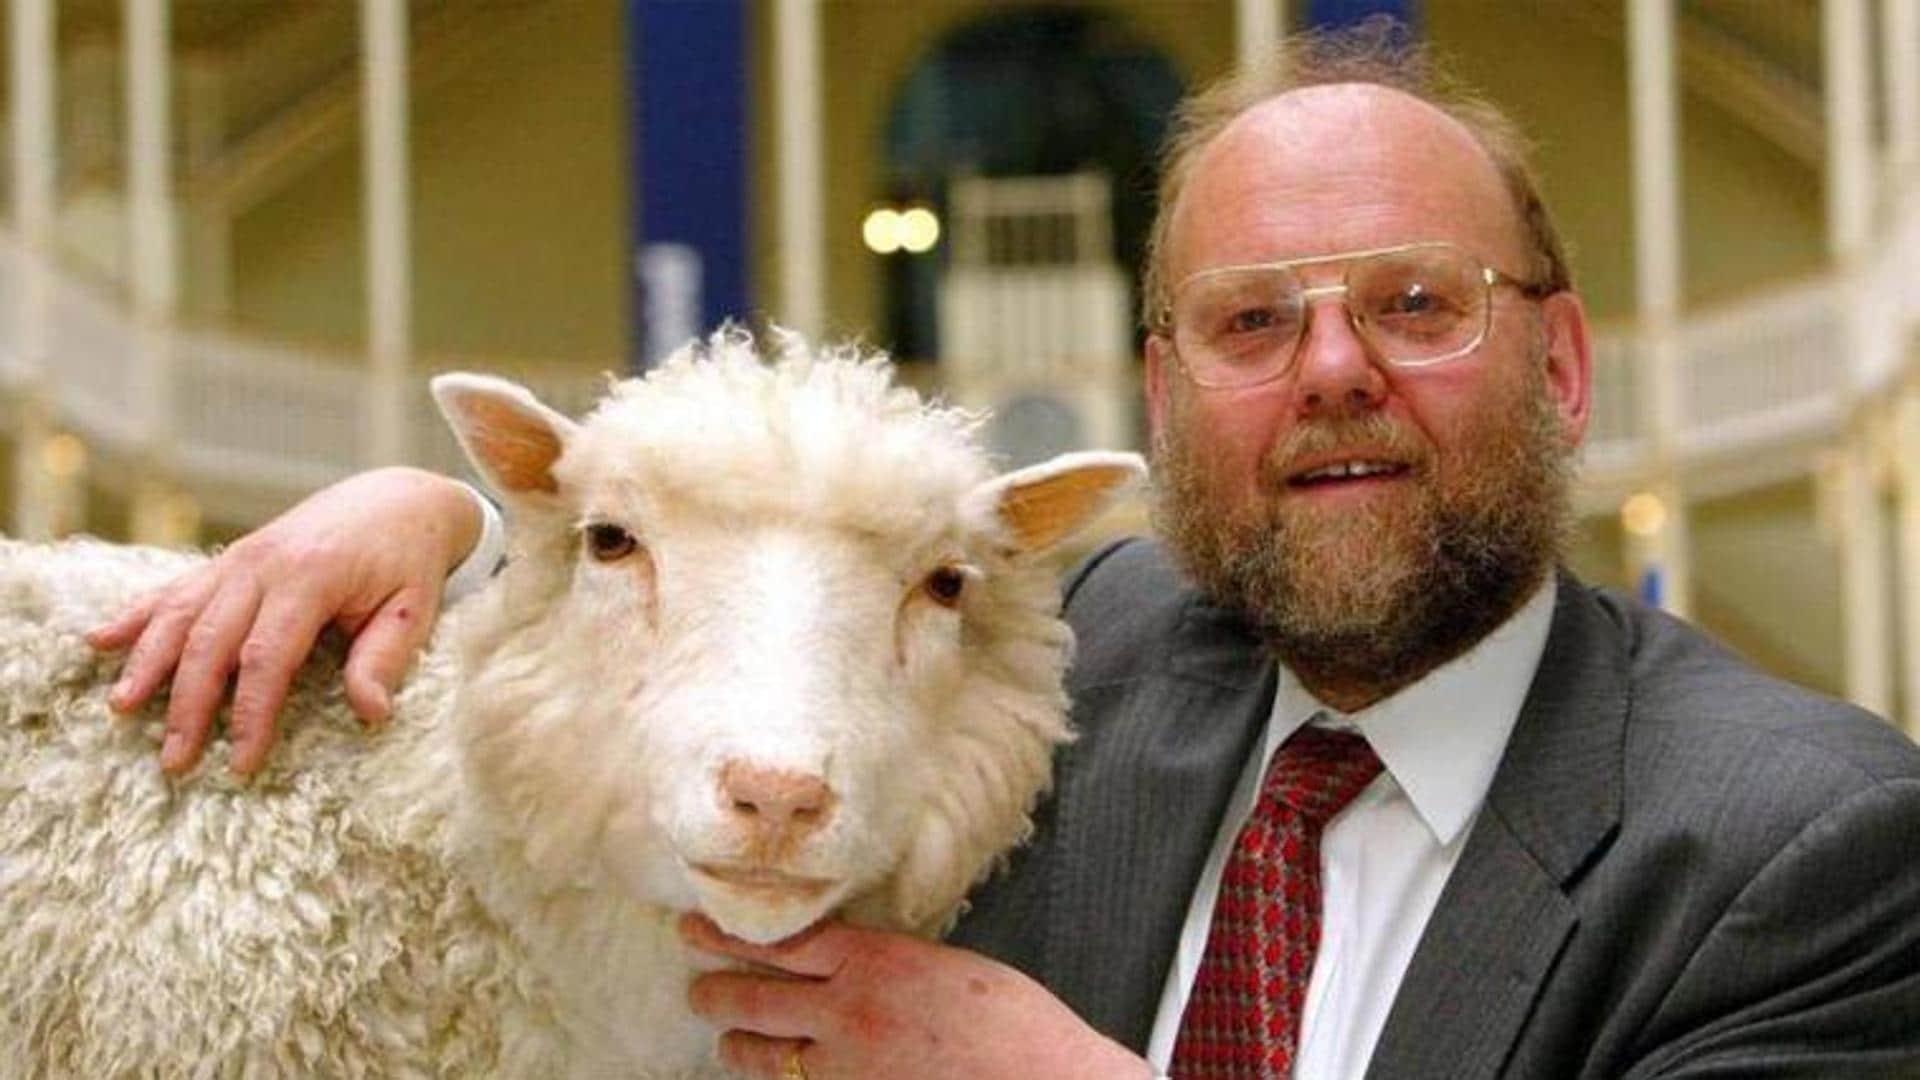 Ian Wilmot, one of the creators of 'Dolly' the sheep, dies